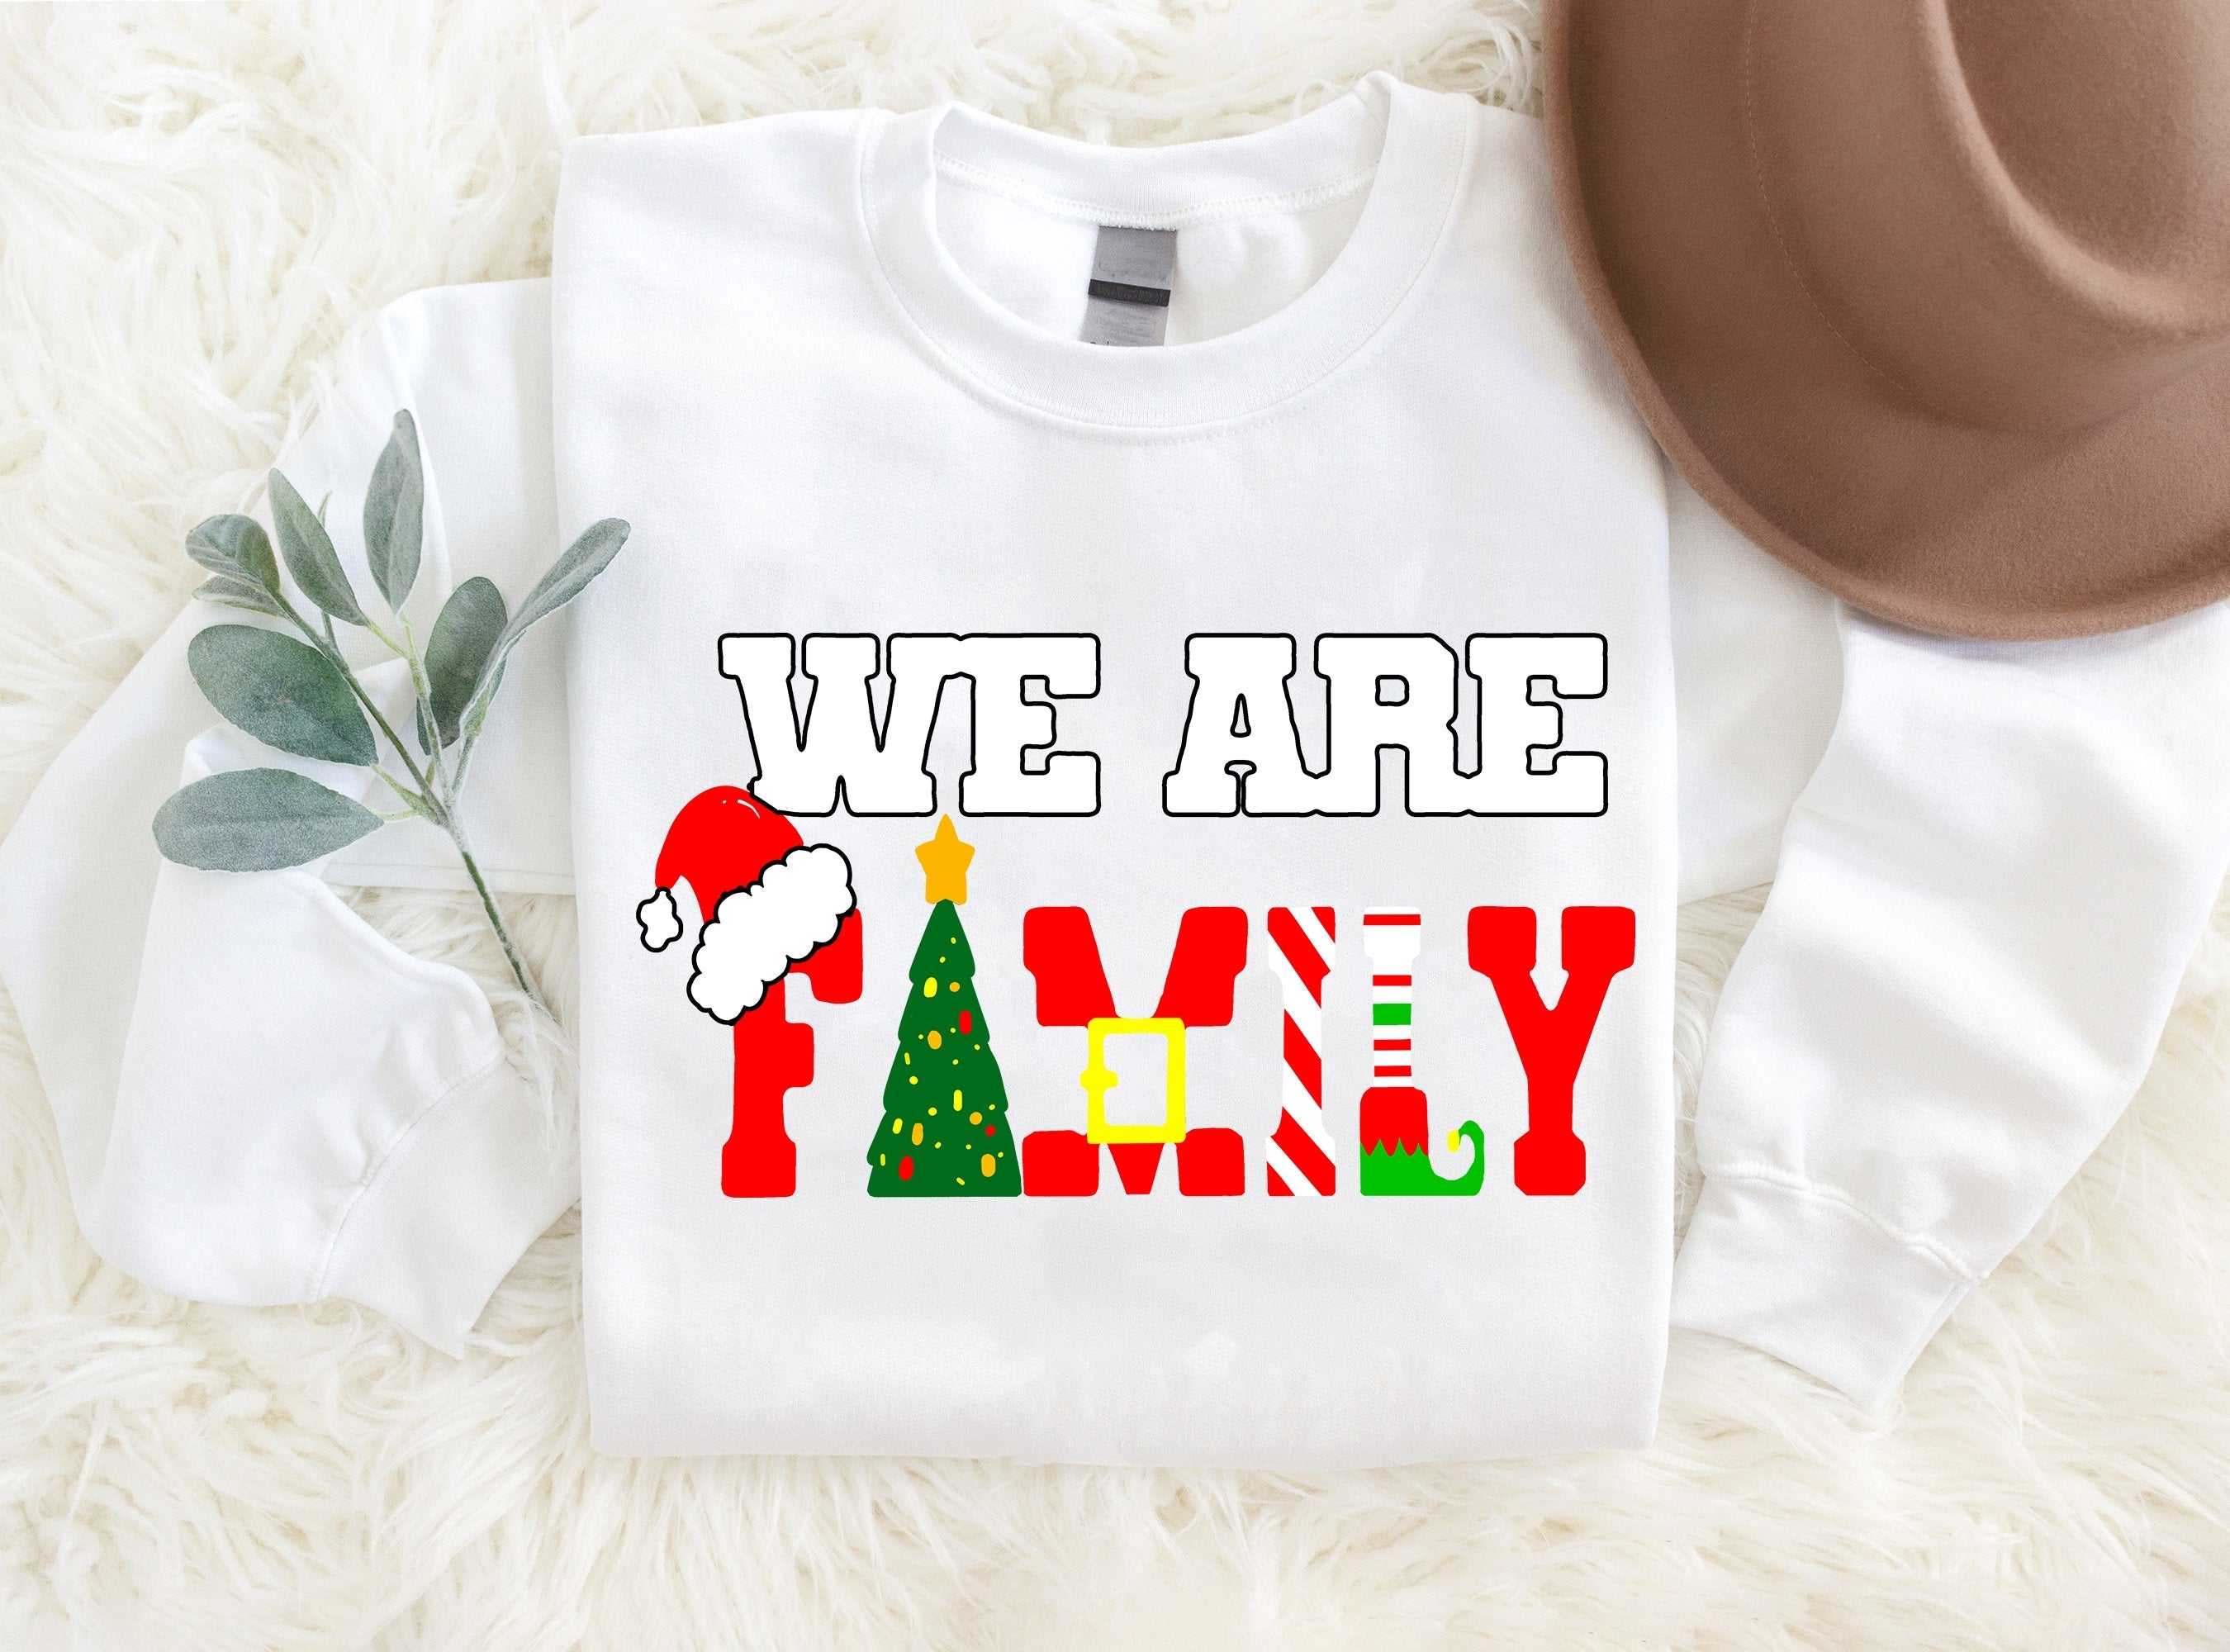 'We Are Family' Colorful Letter Pattern Family Christmas Matching Pajamas Tops Cute White Long Sleeve Sweatshirt With Dog Bandana